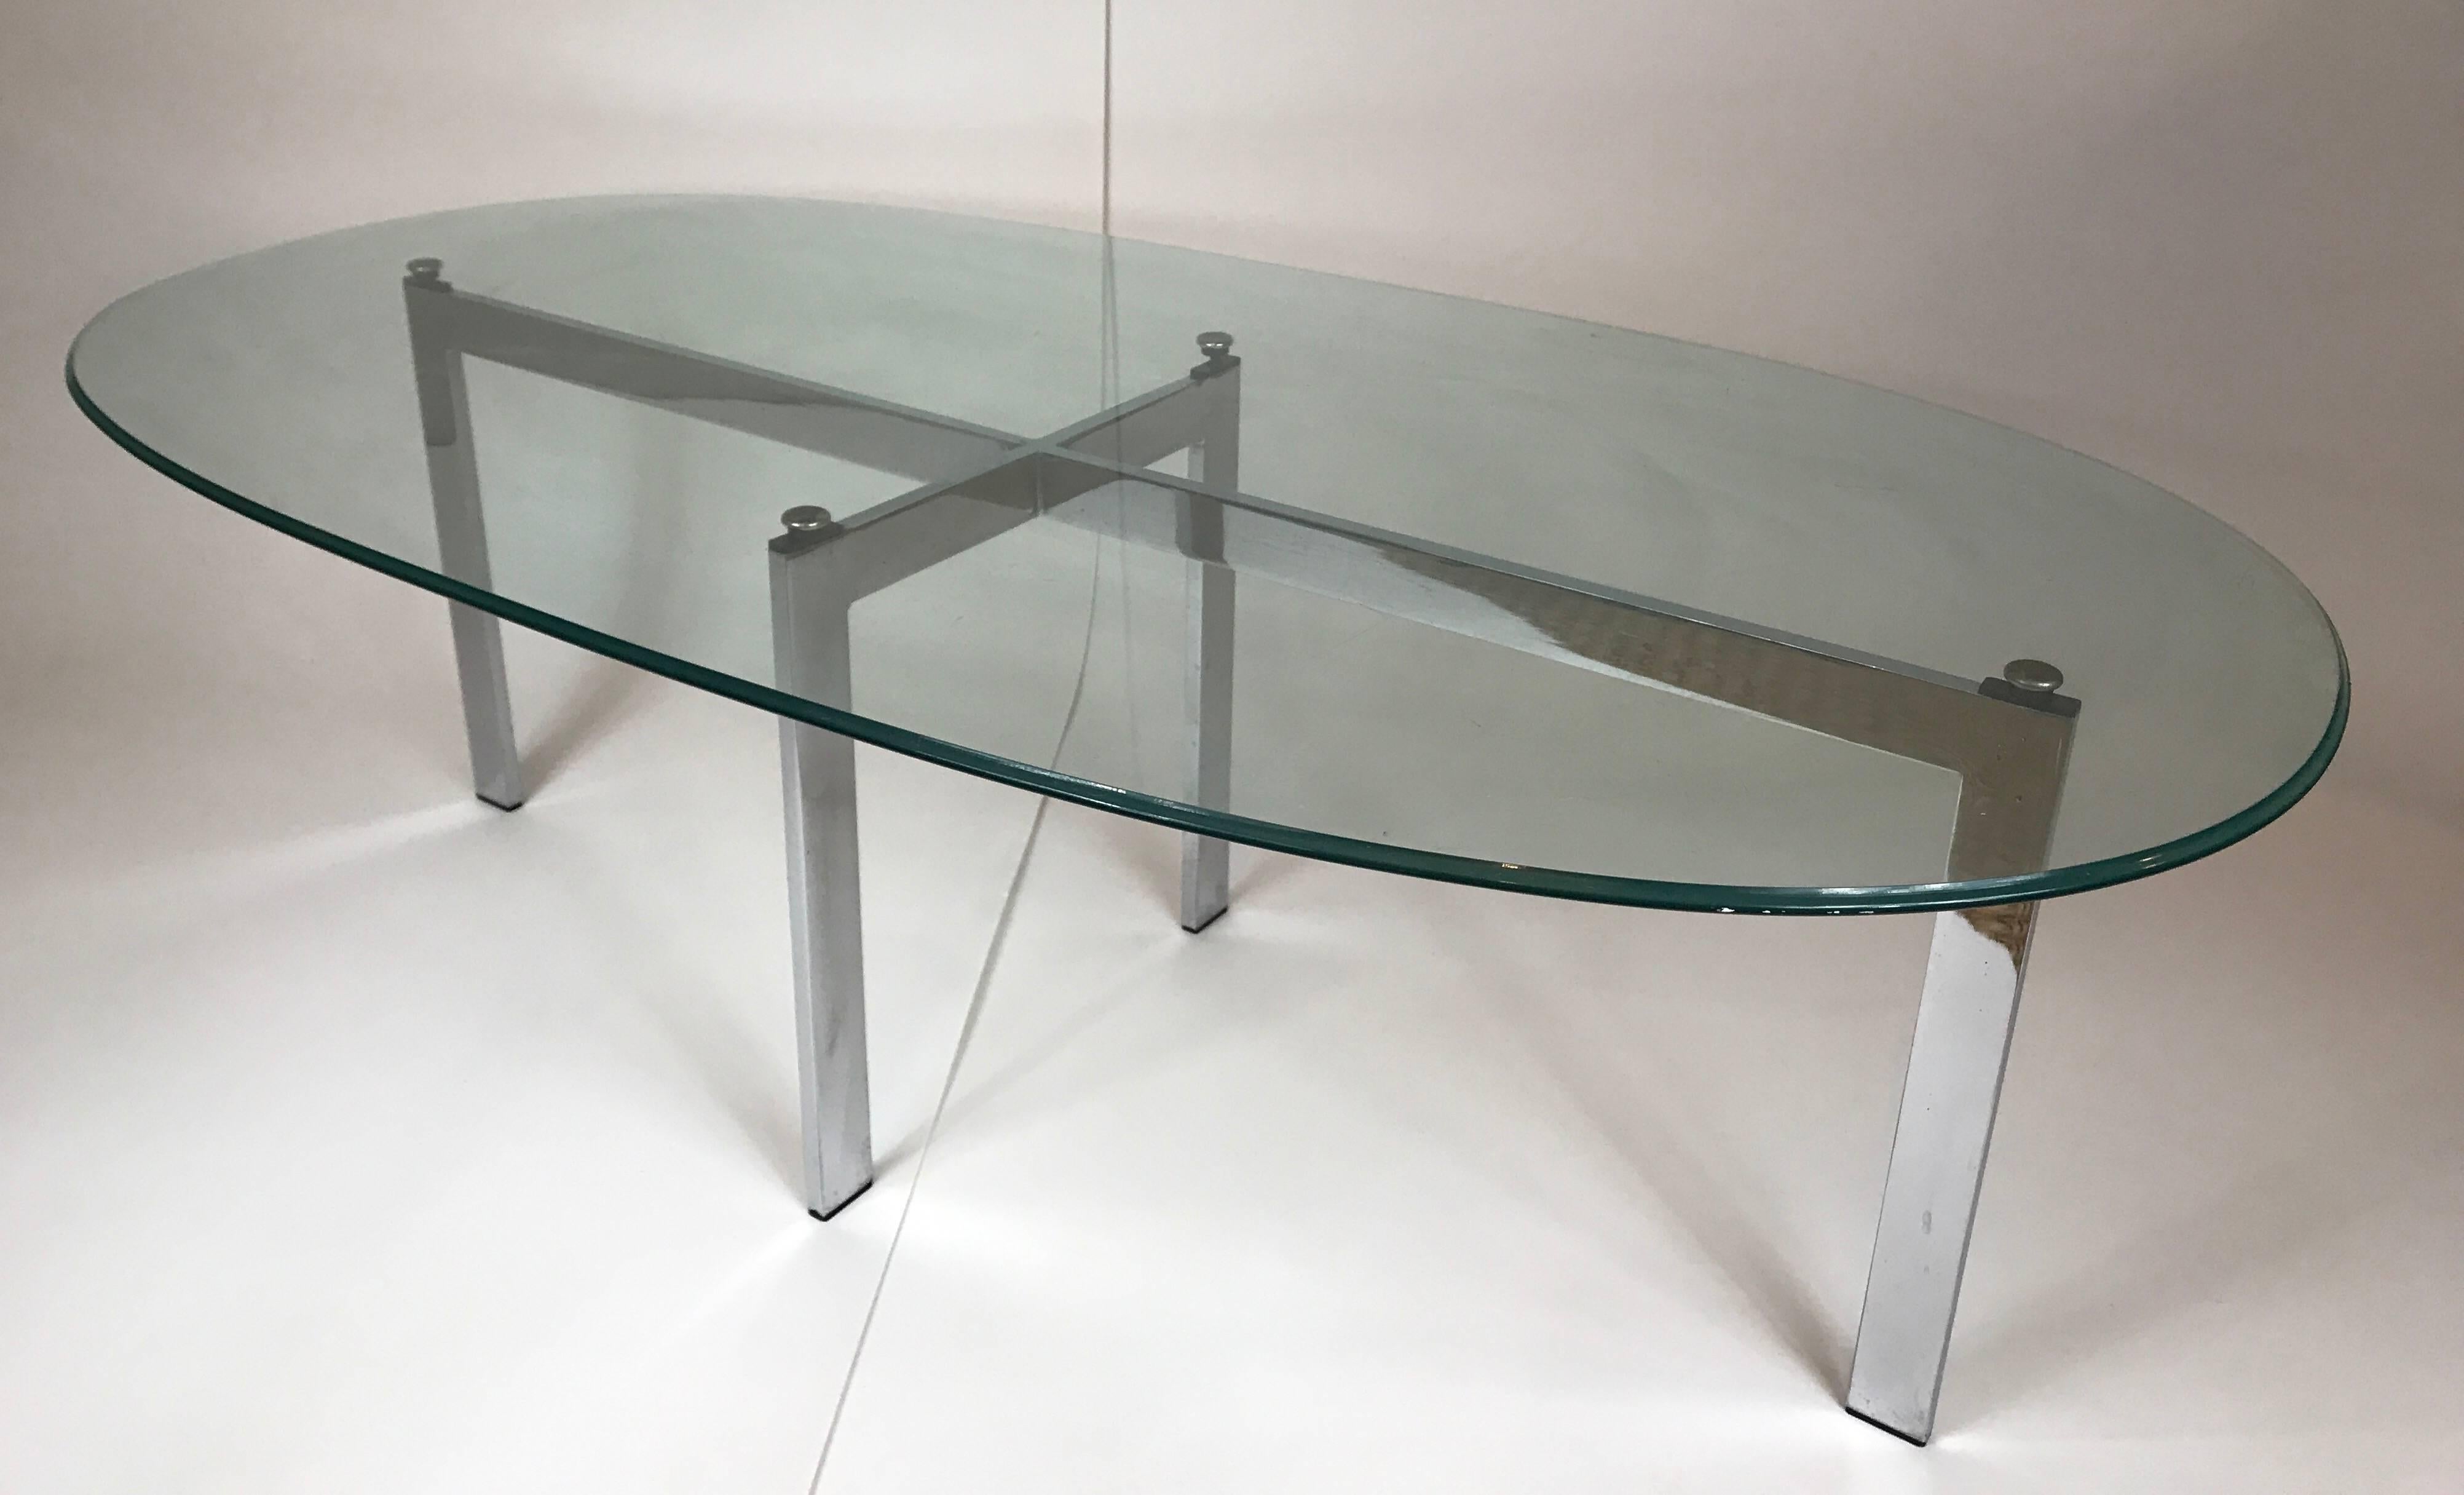 1970s chrome base cocktail table with thick oval beveled glass top. Base measures 42